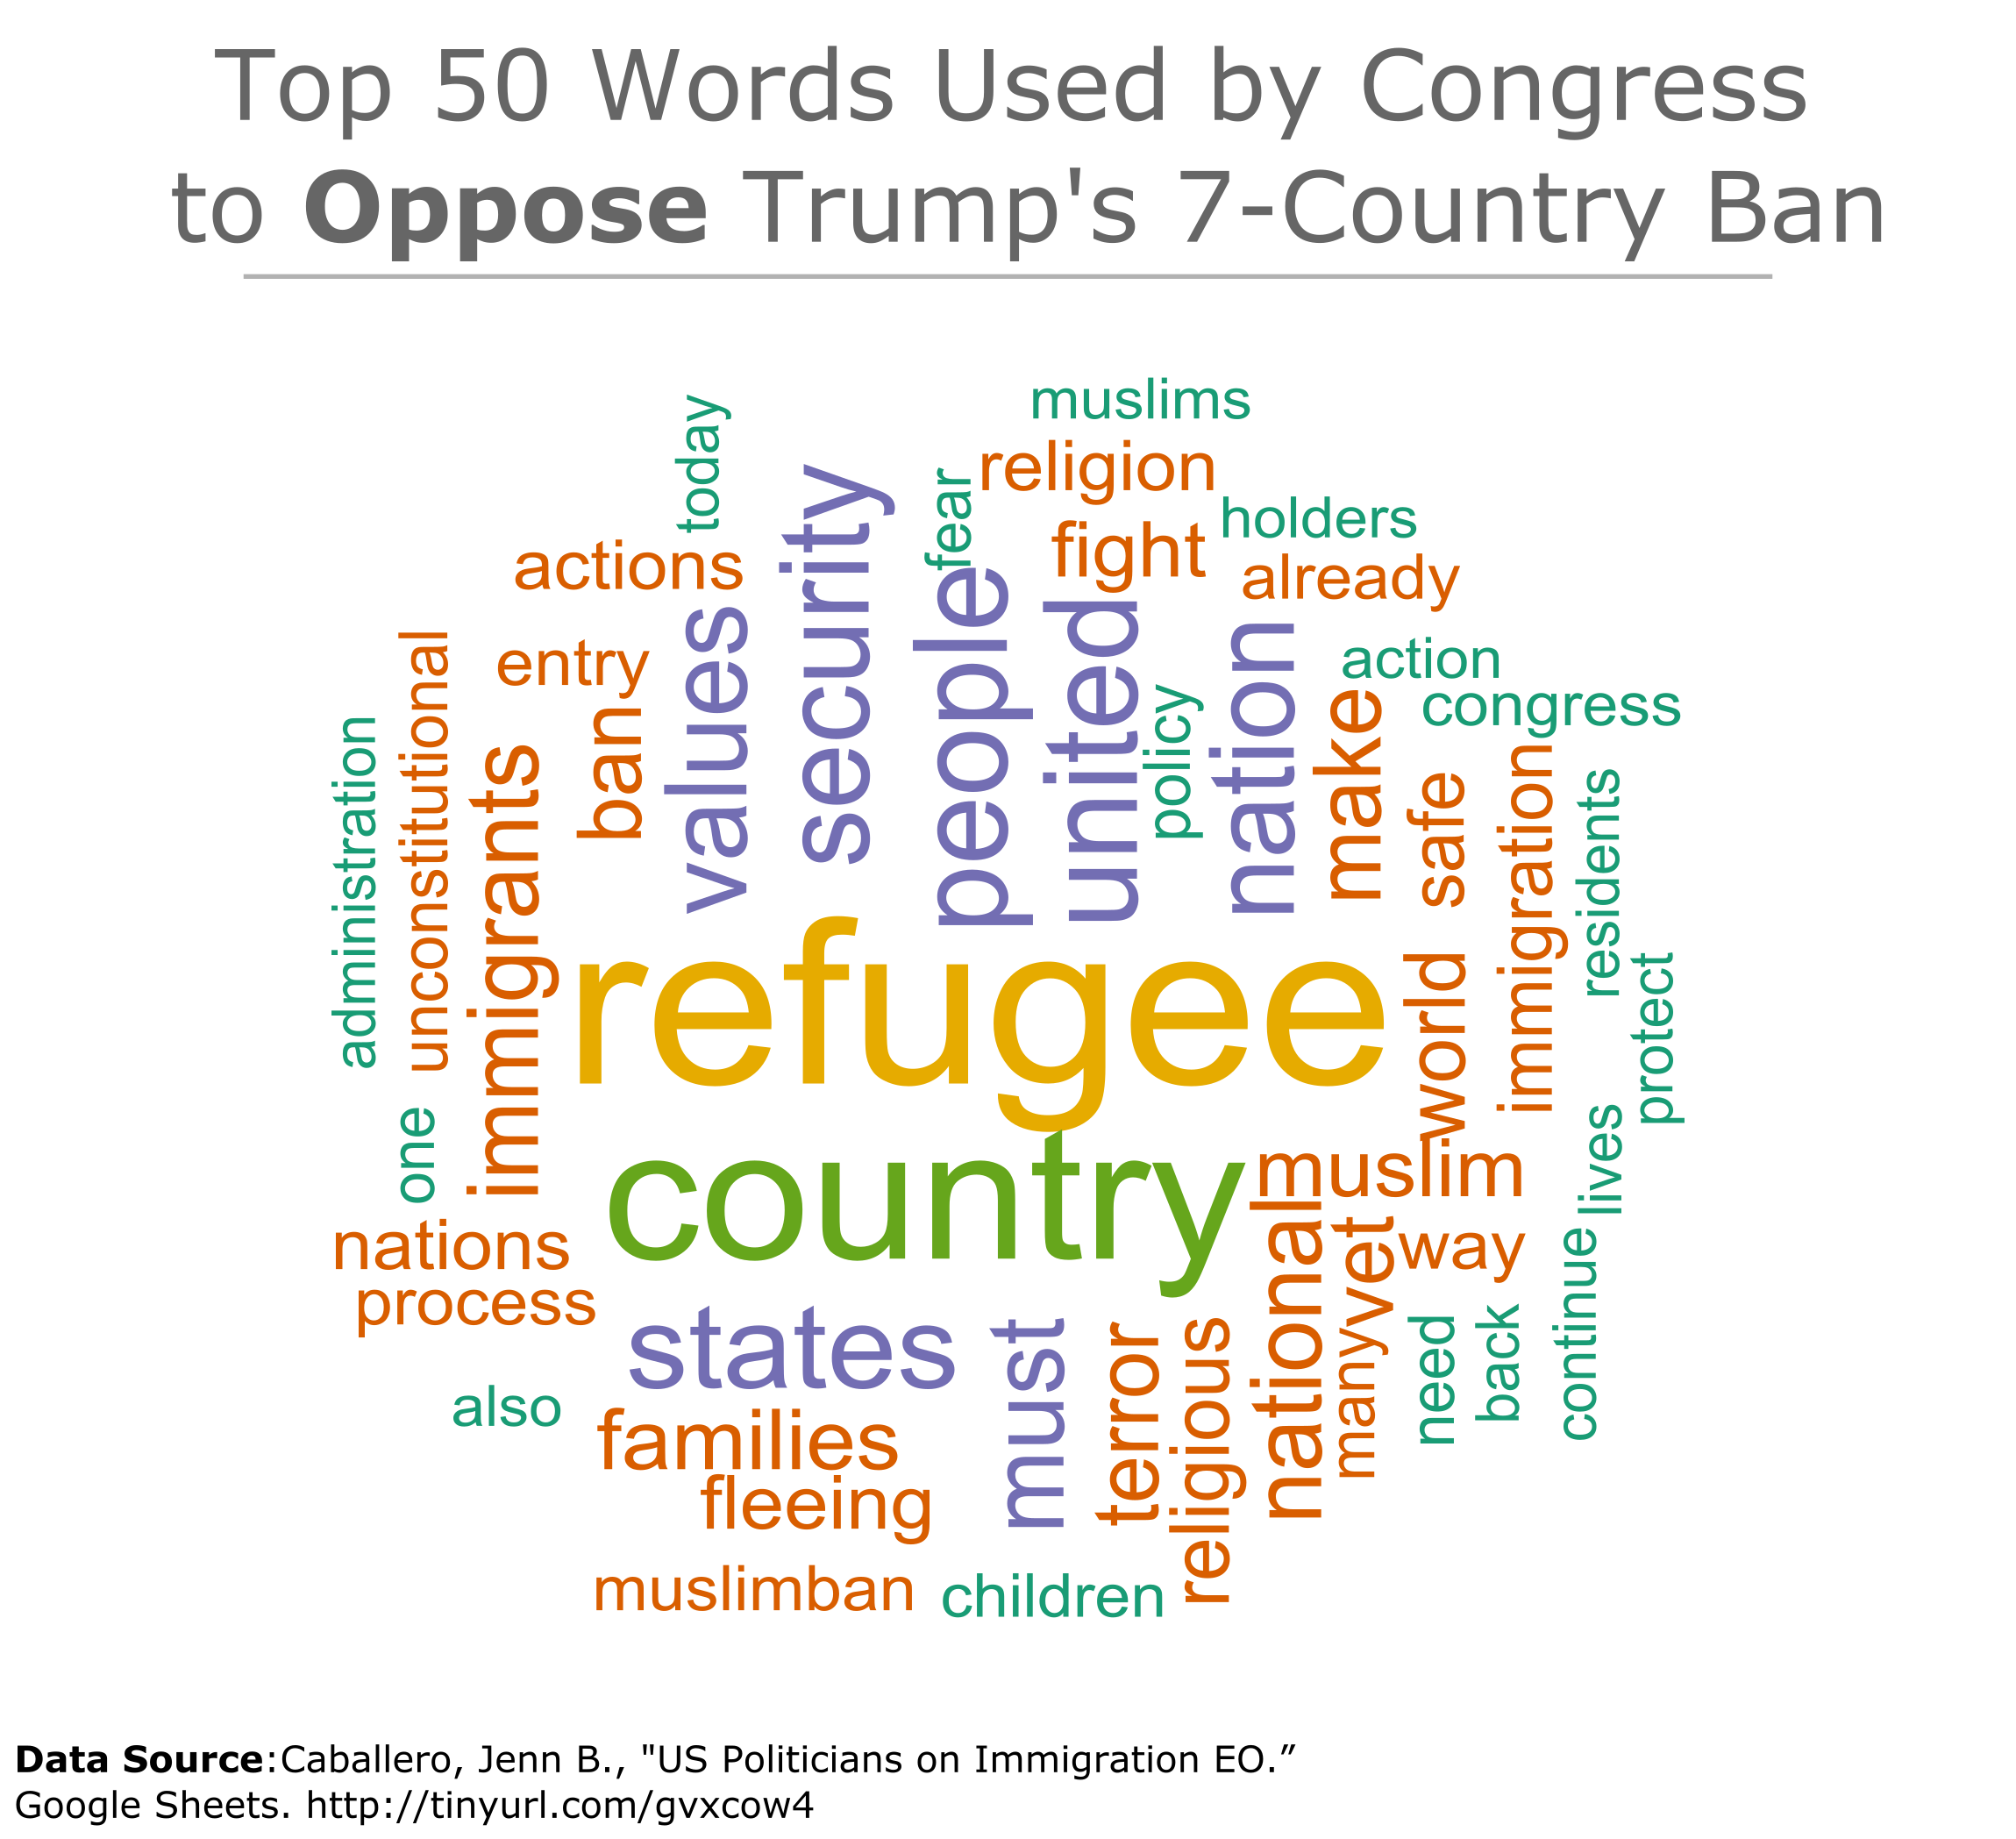 Top 50 Words Used by Congress to Oppose Trump's 7-Country Ban